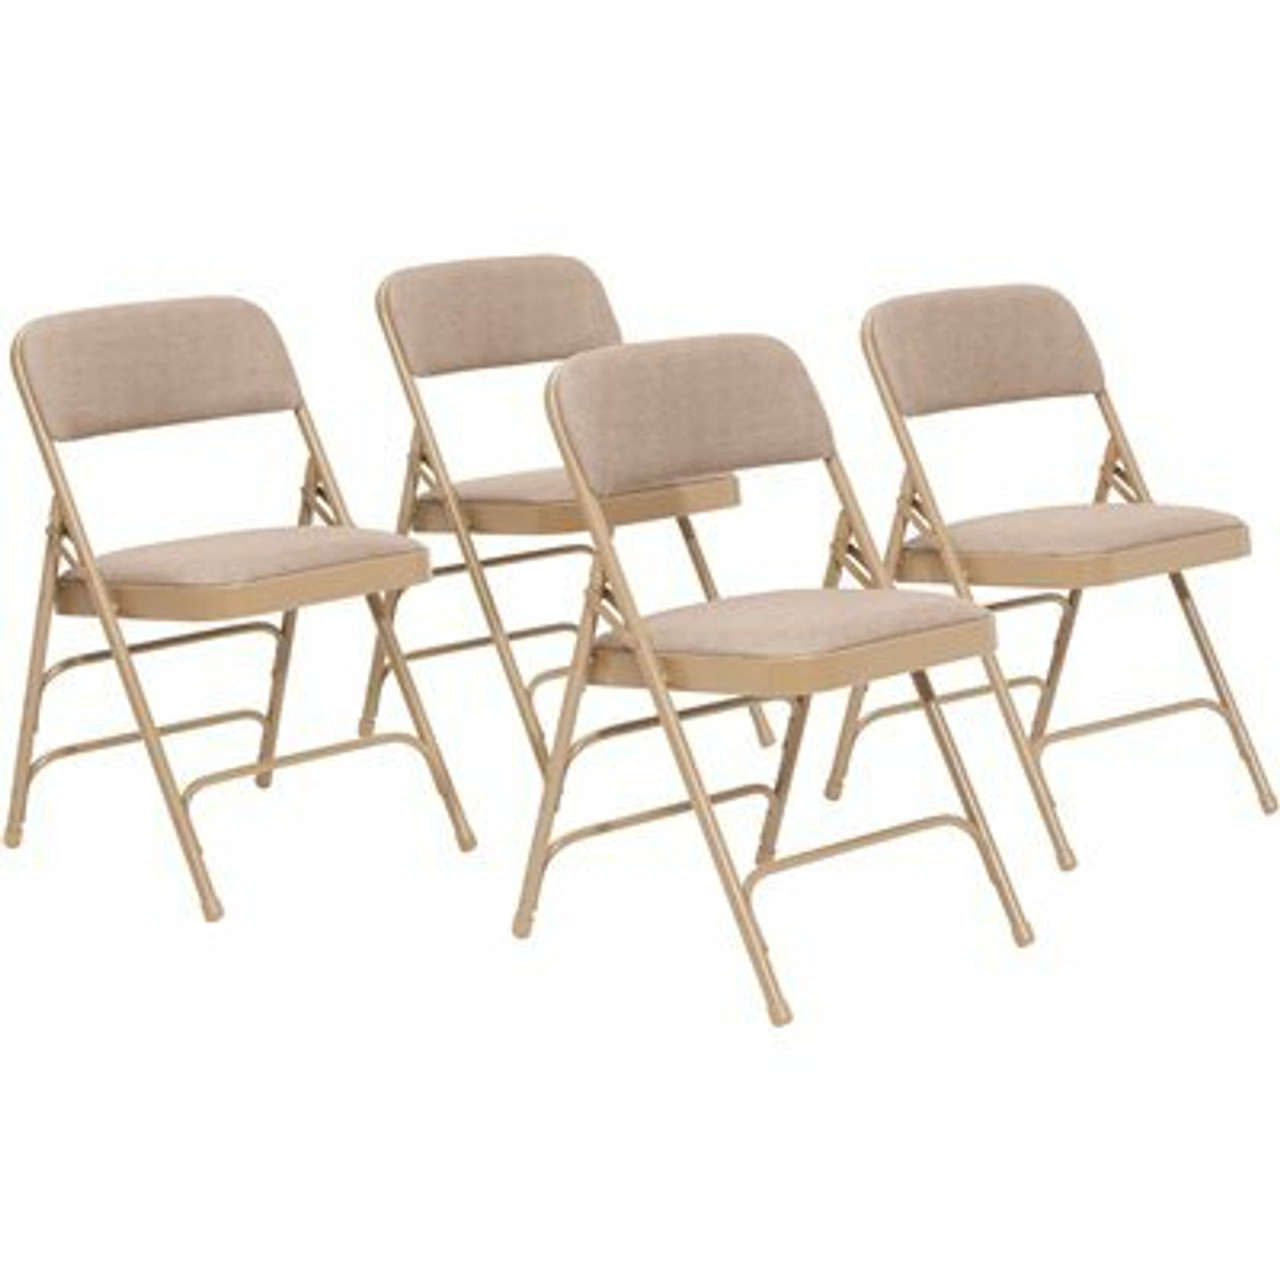 National Public Seating Beige Fabric Seat Stackable Folding Chair (Set Of 4) - 303935975